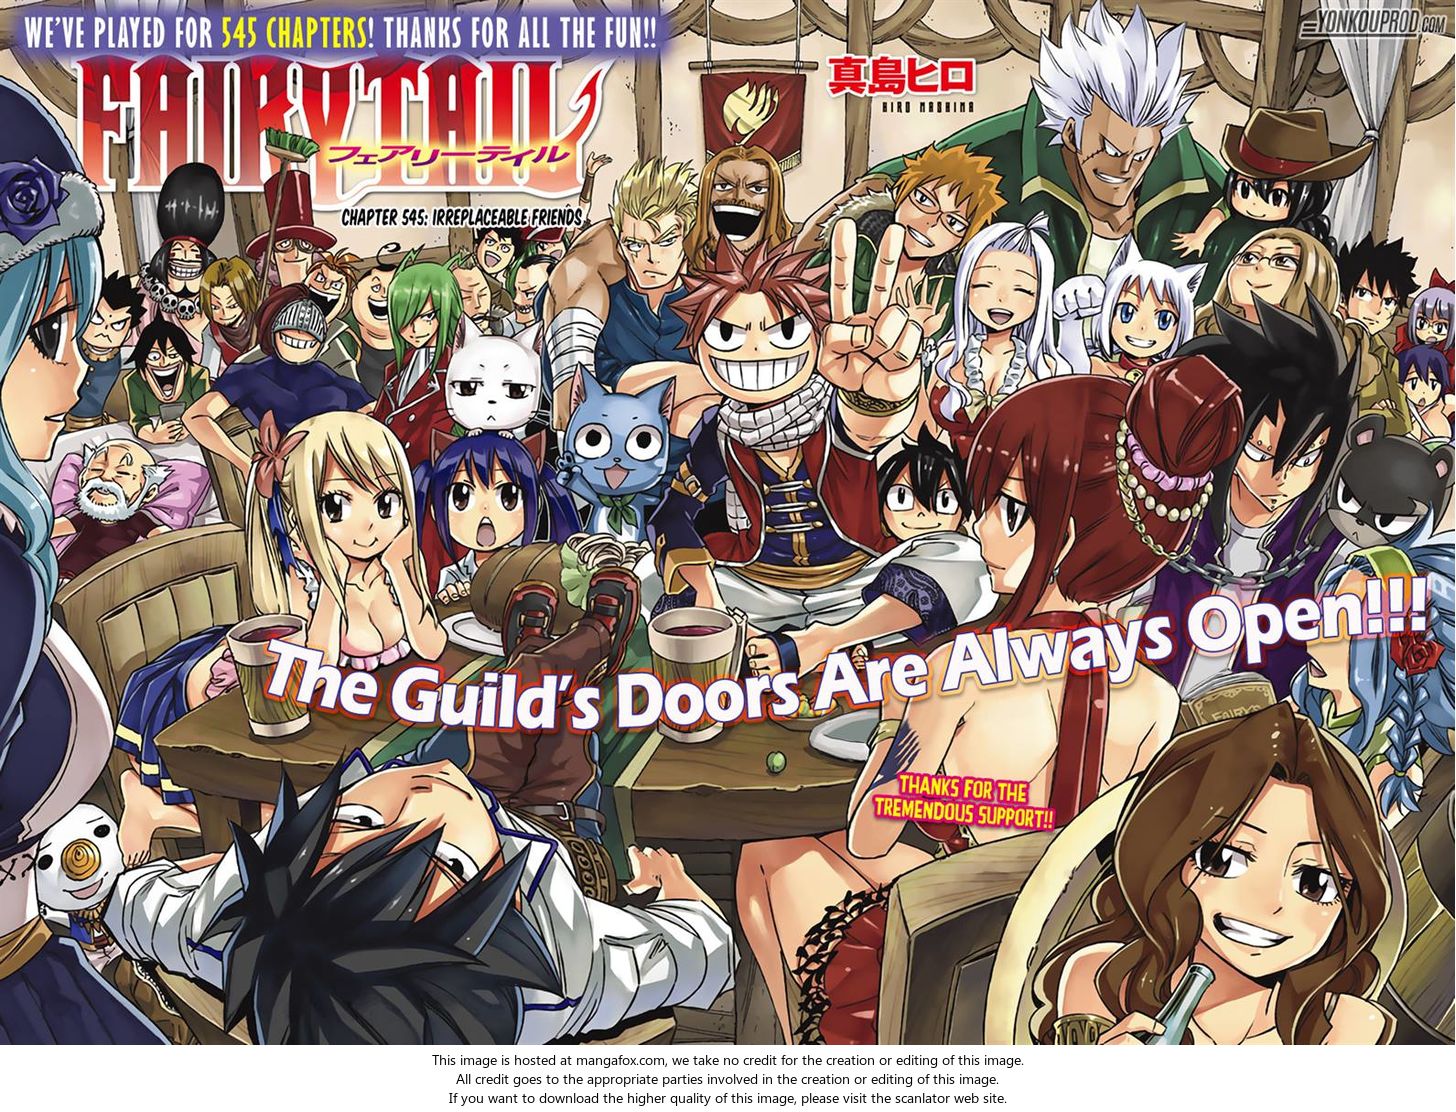 Otaku Nuts Fairy Tail Chapter 545 Final Review Irreplaceable Friends